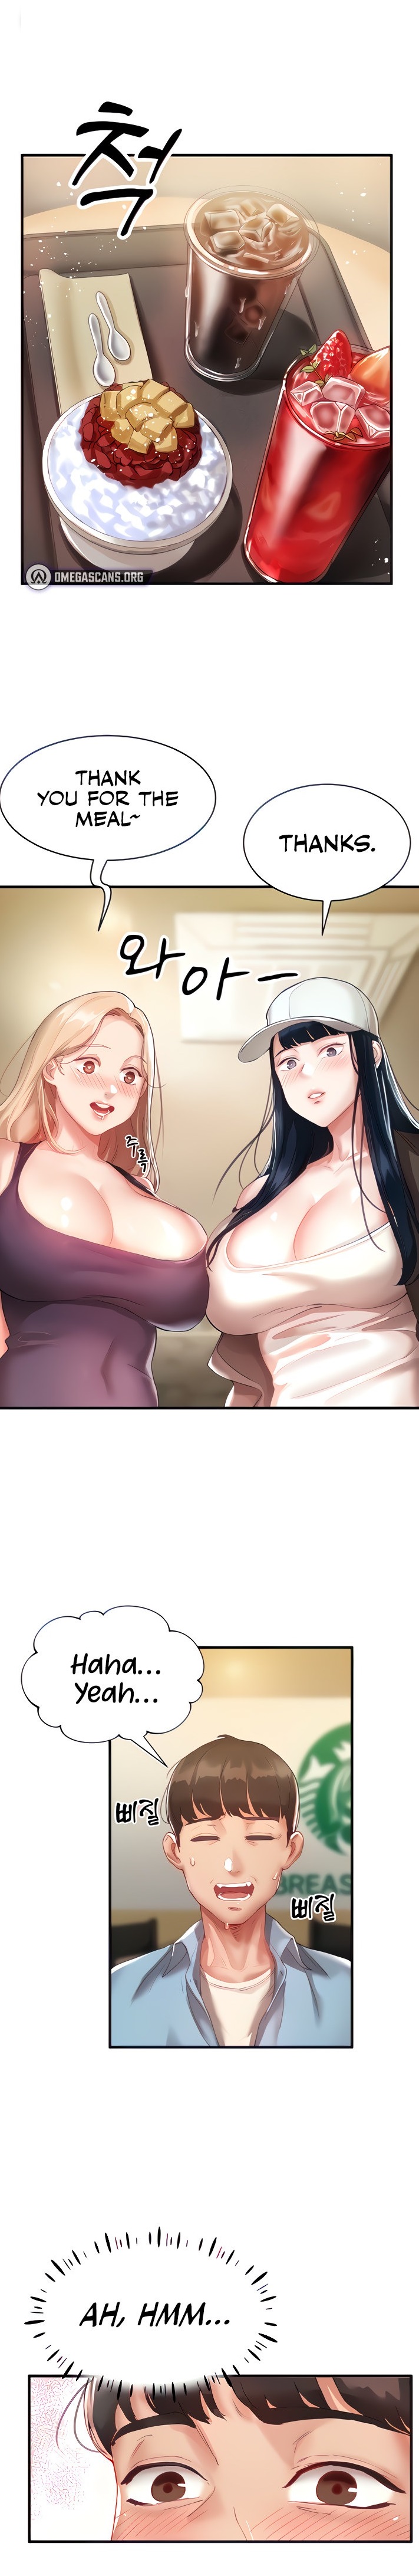 Living With Two Busty Women - Chapter 2 Page 1